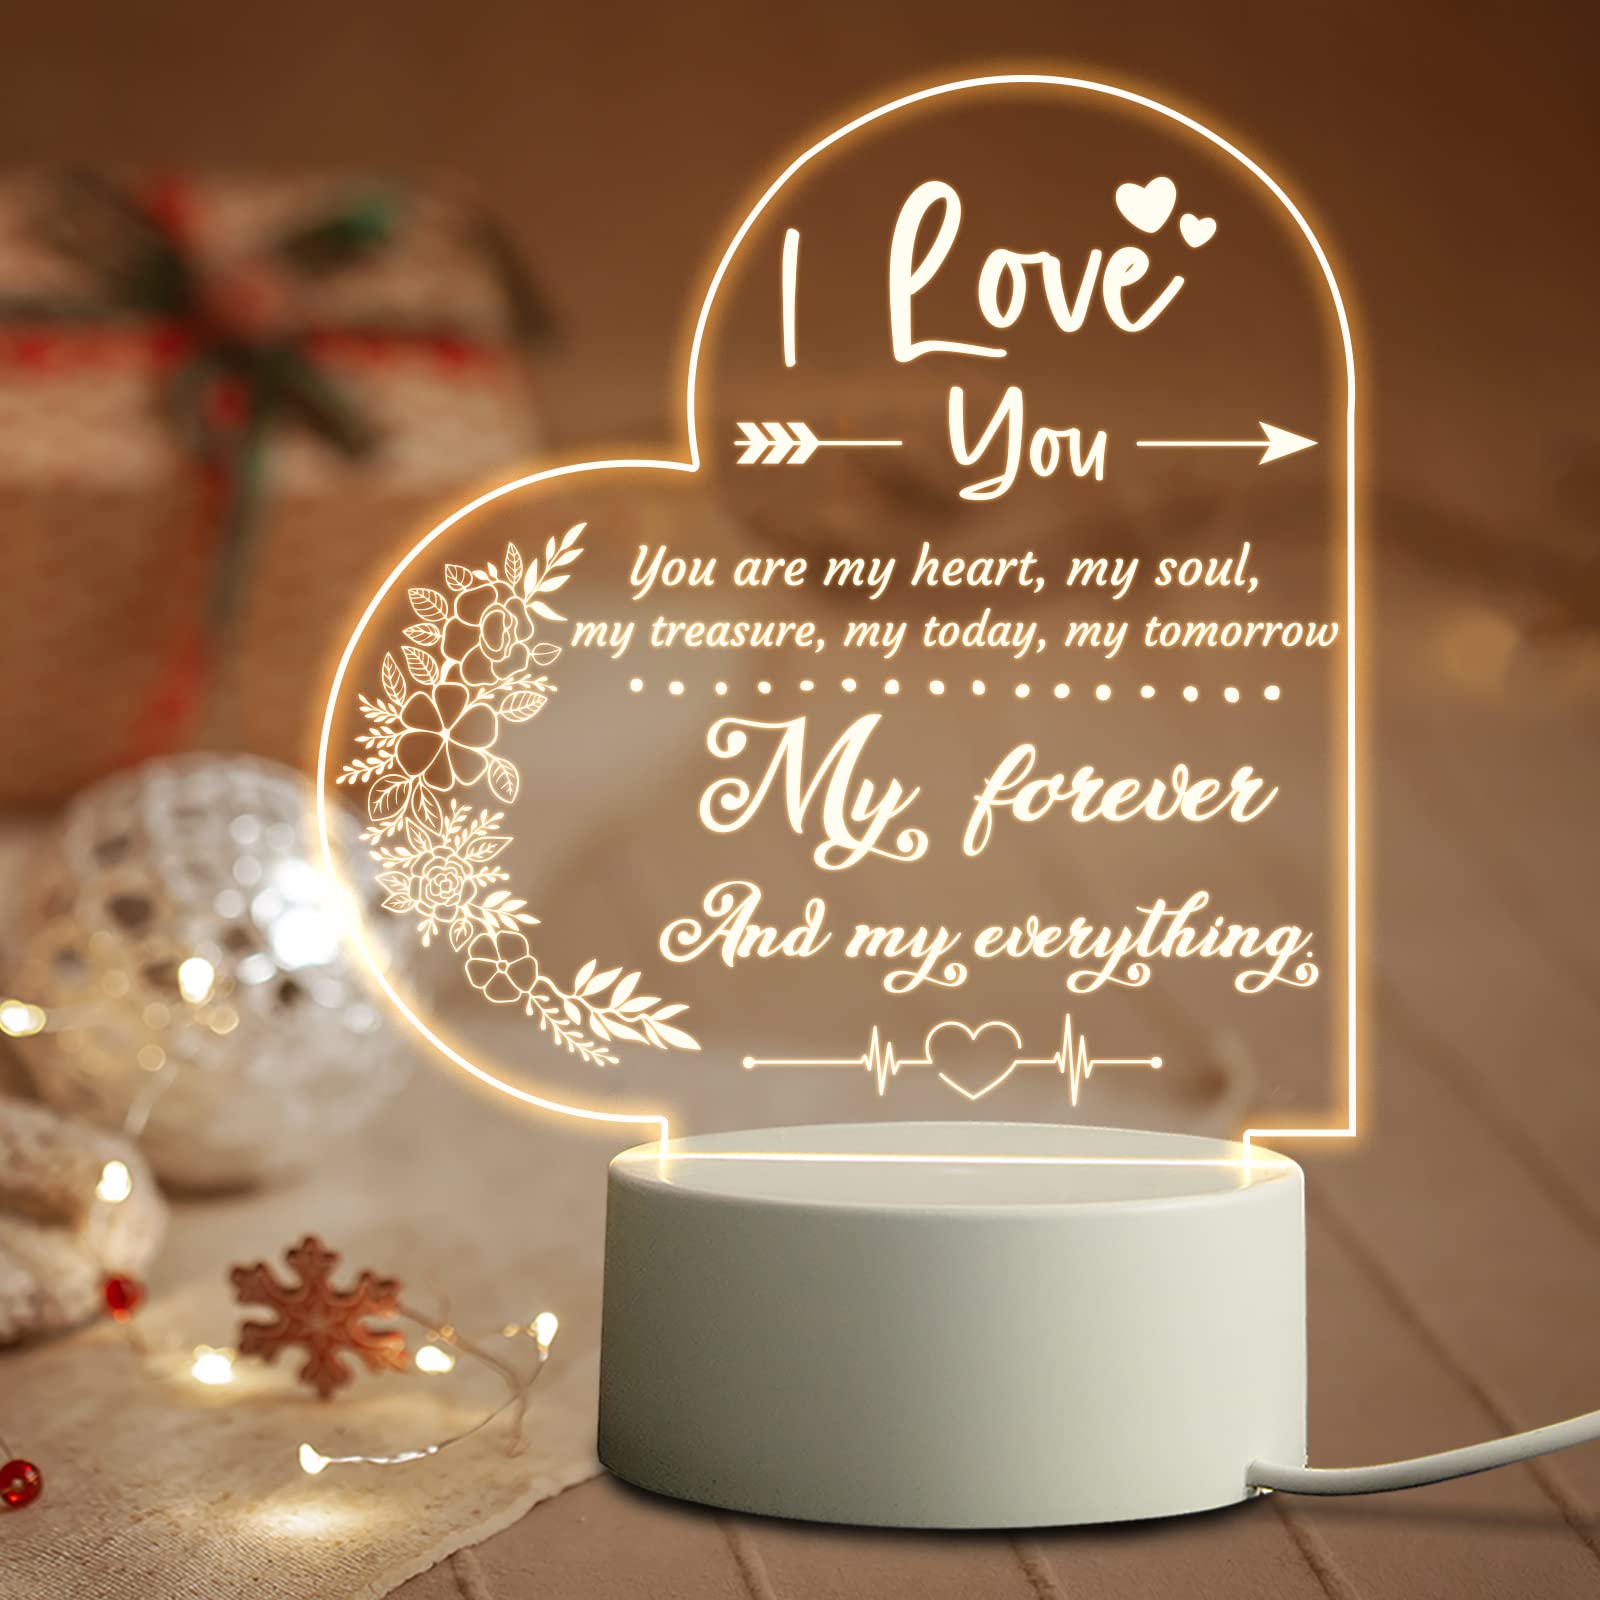 Personalized Gifts for Boyfriend, Personalized Gifts for Boyfriend ideas